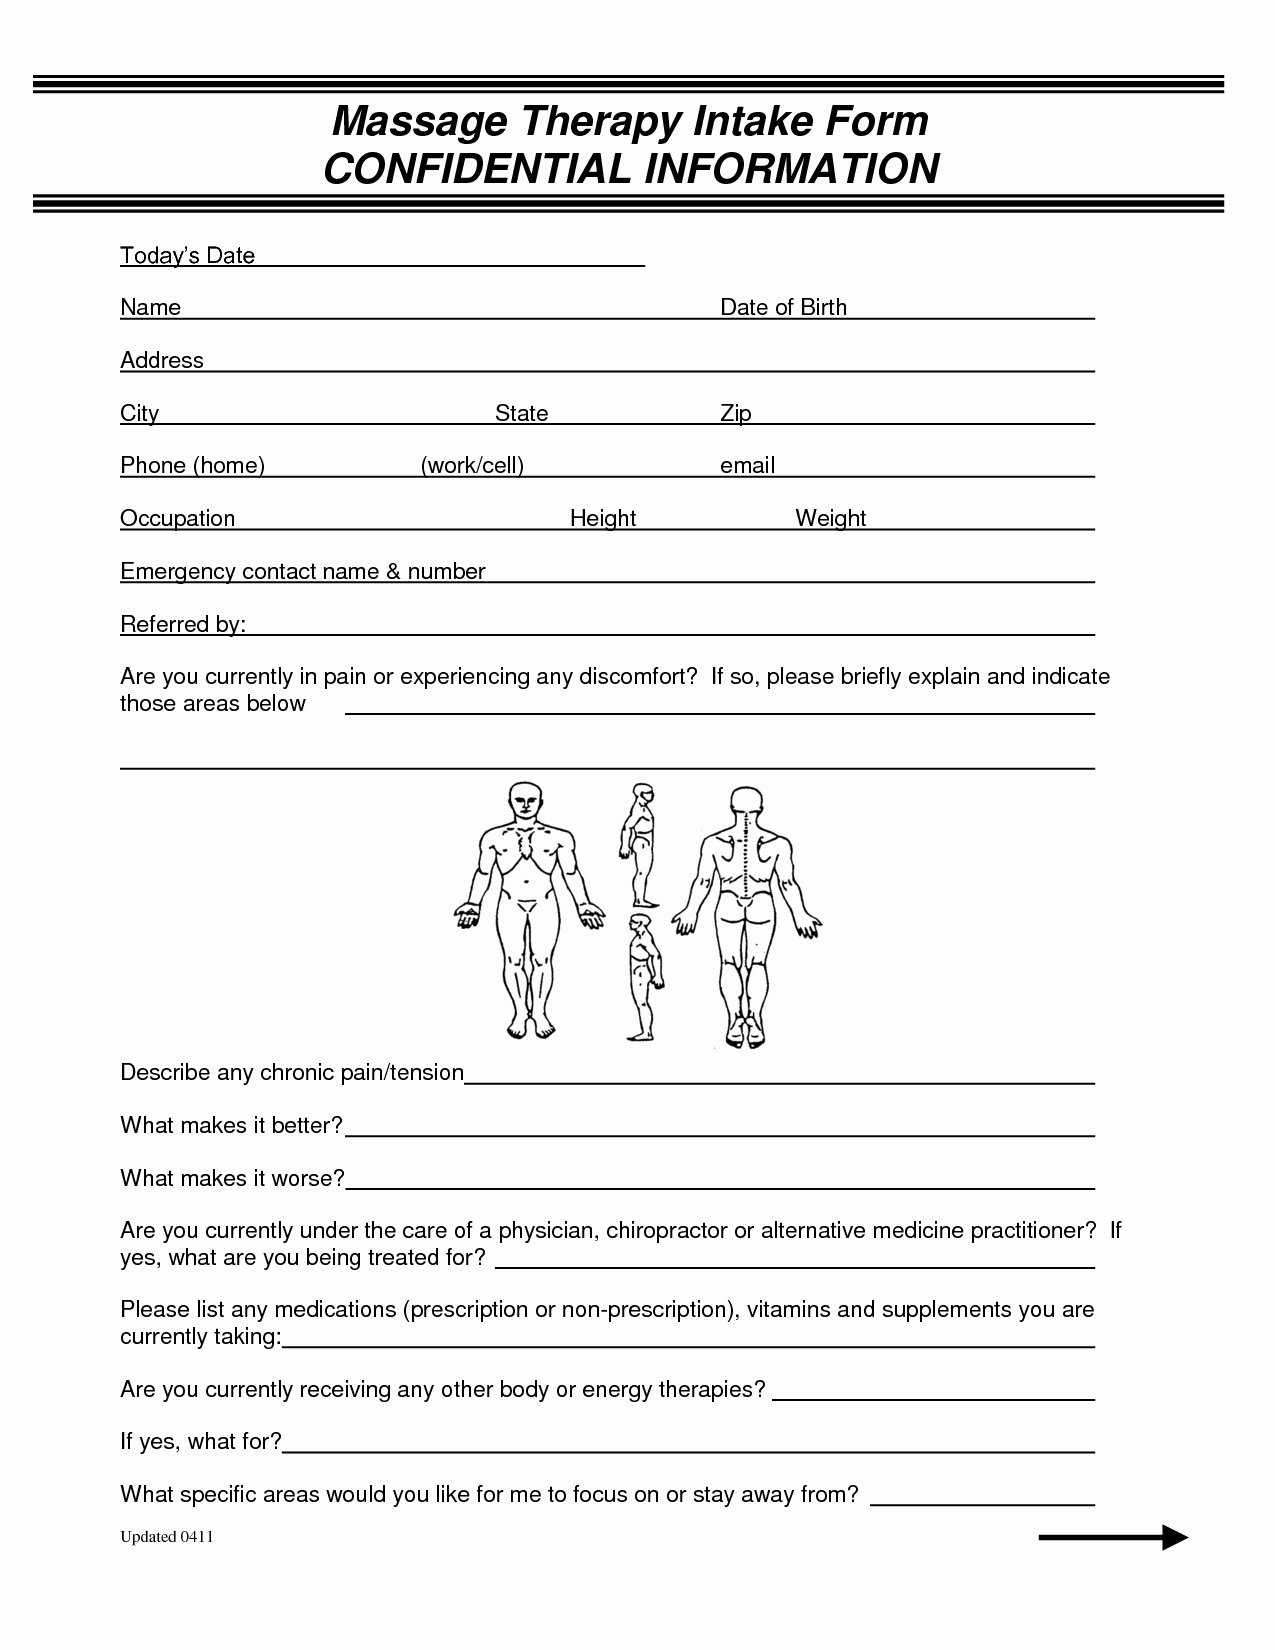 Acupuncture Intake form Template Unique soap Note Massage therapy Blank Google Search